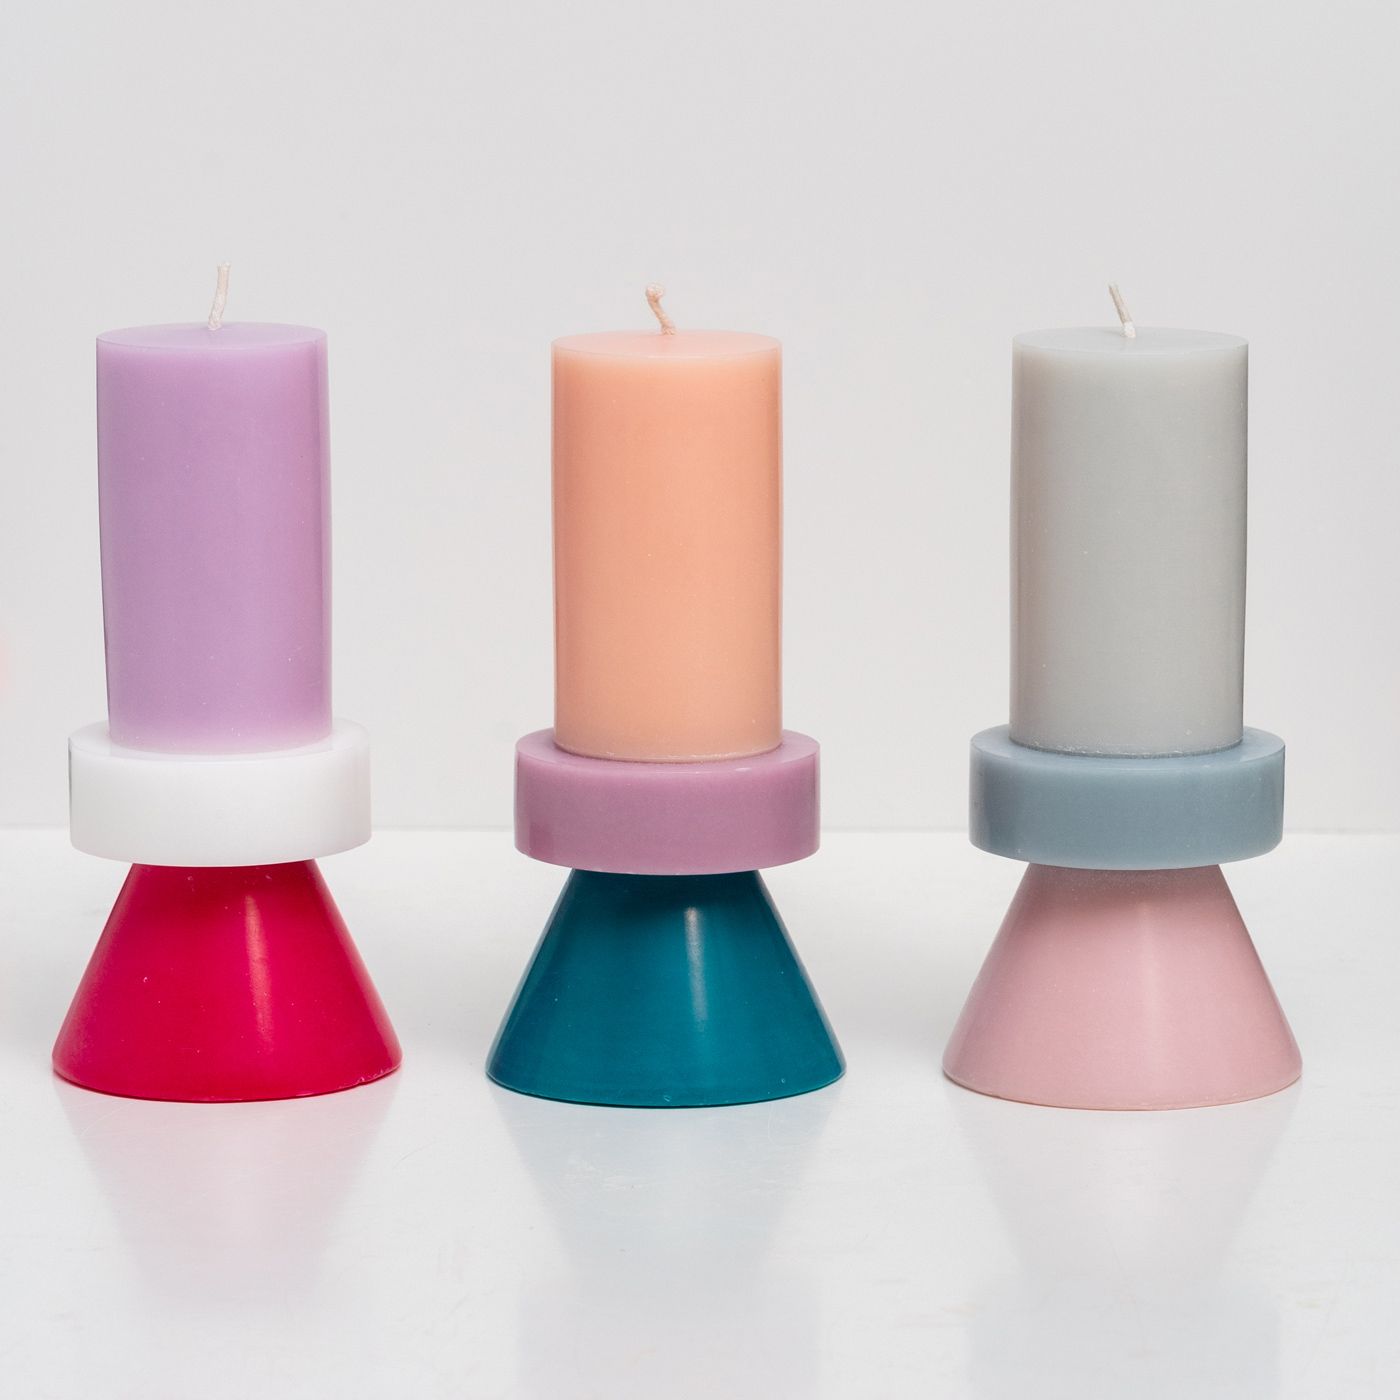 Stack Candle Tall, shaped candles by Yod and co in pink, purple, blue